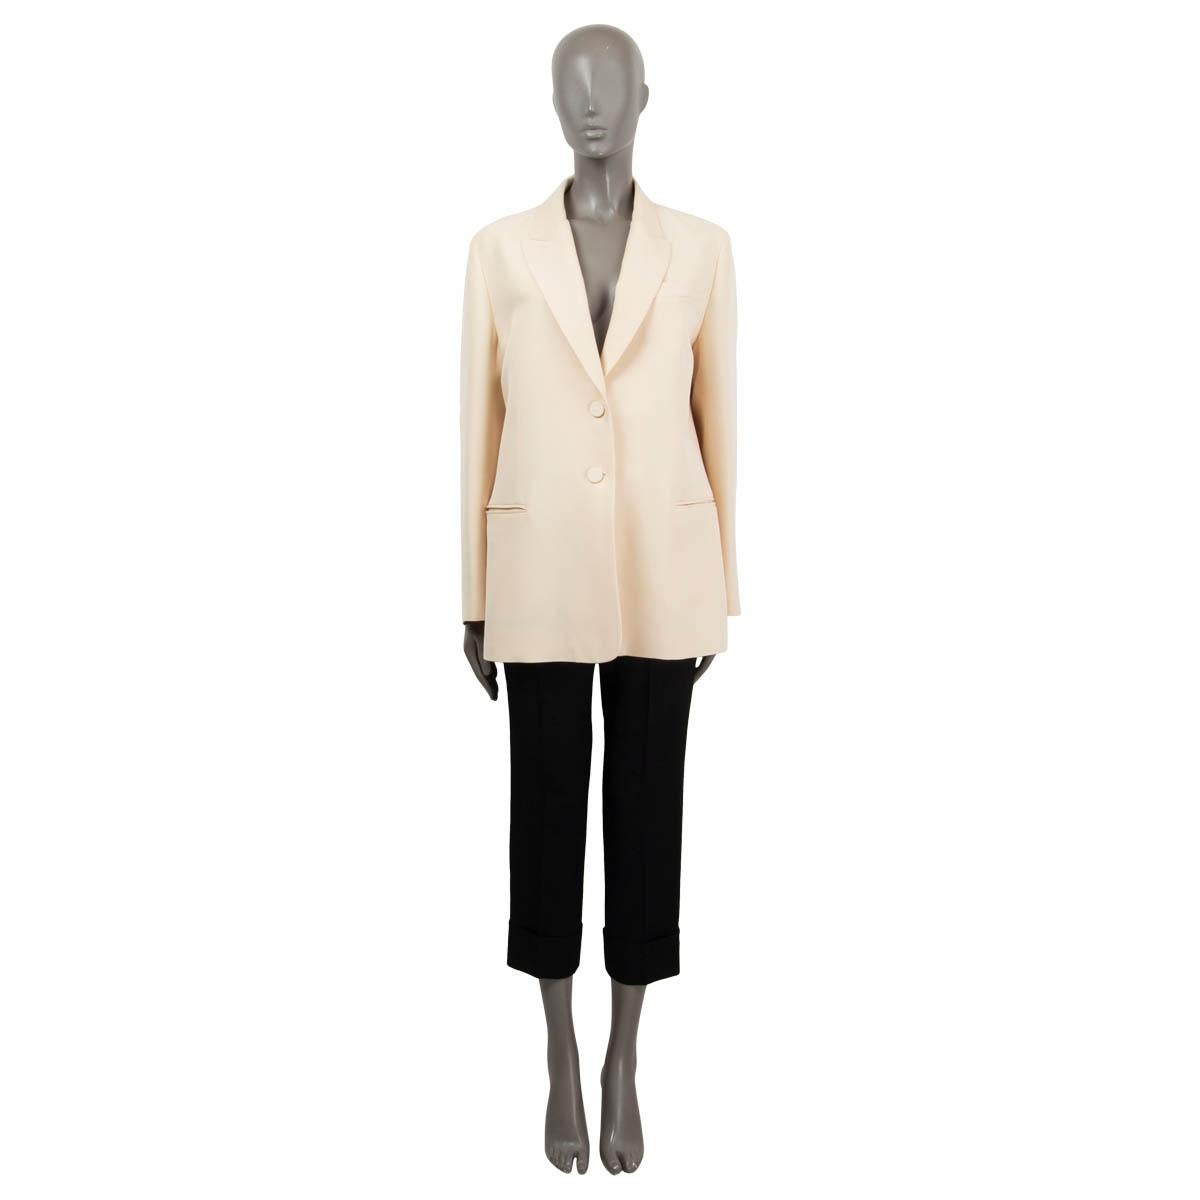 100% authentic Valentino blazer in beige silk (64%) and wool (36%). Features a peak lapel and two welt pockets. Closes with two fabric covered buttons on the front and is lined in silk (100%). Has been worn and is in excellent